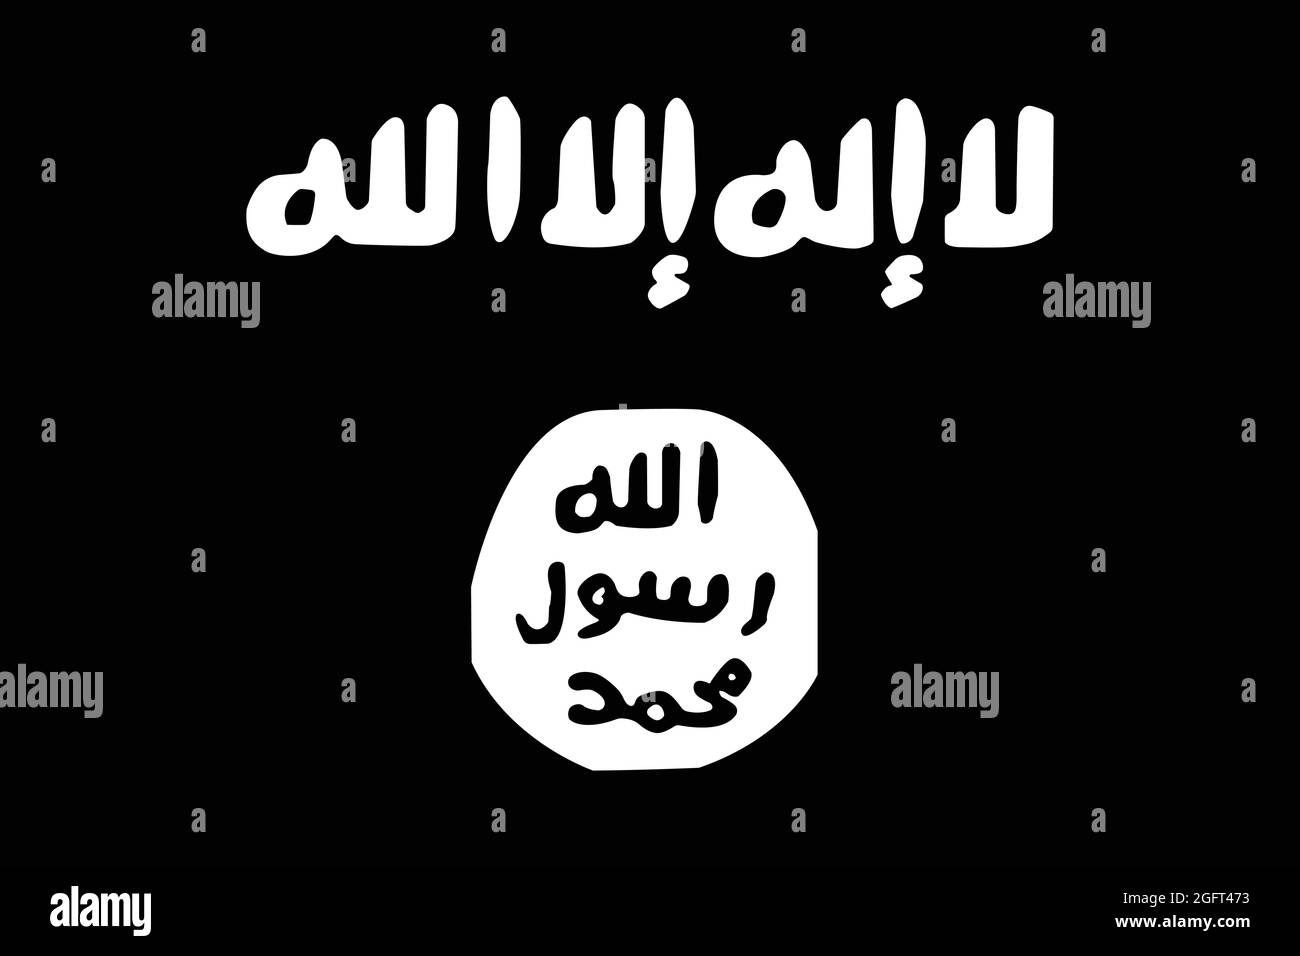 Spectacular representation of the terrorist group Islamic State ISIS ISIS-K KHORASAN. Stock Vector